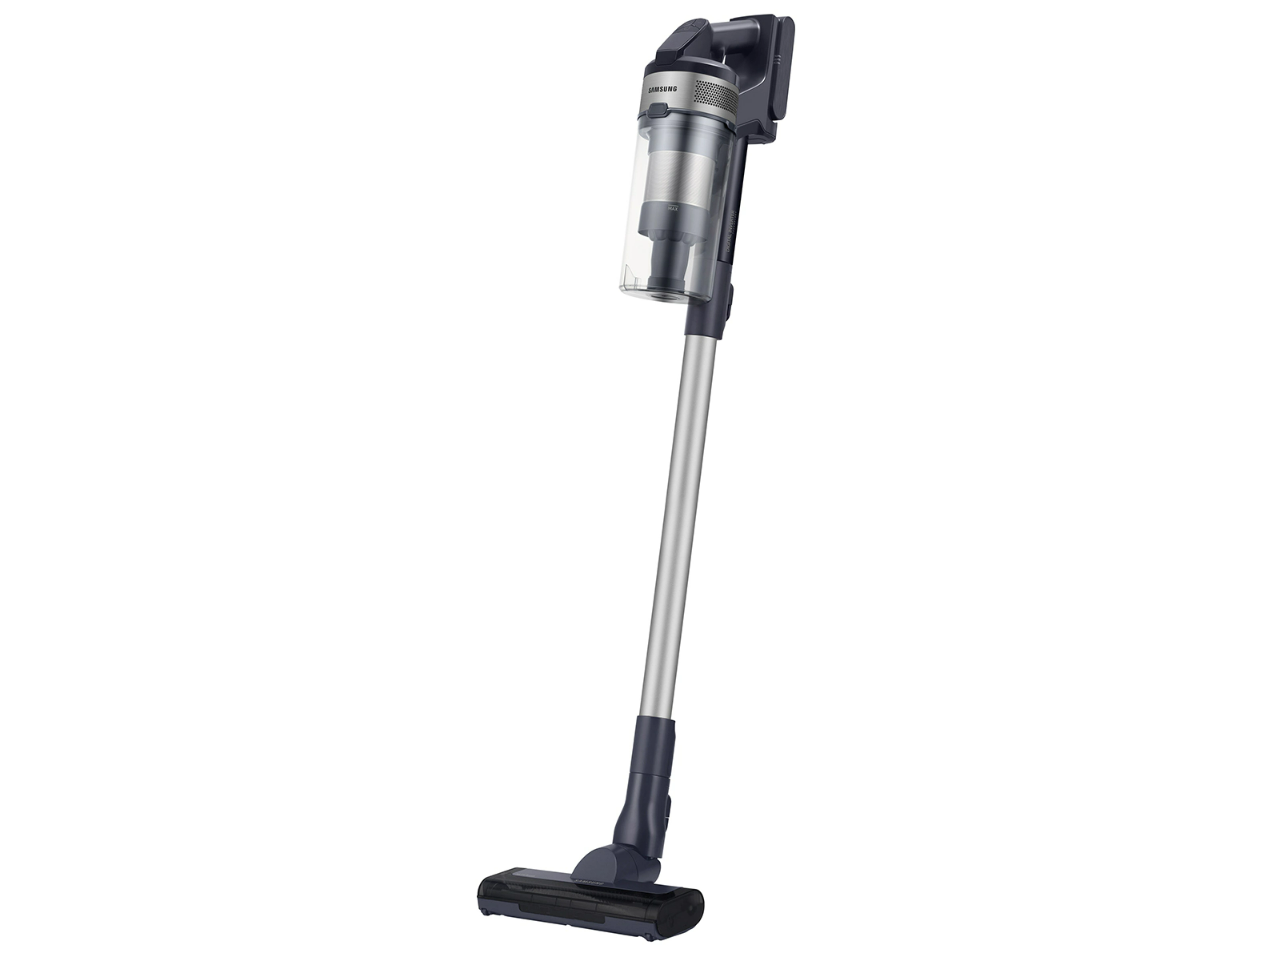 Samsung VS15A6031N5/AA-RB Jet 60 Cordless Stick Vacuum - Certified Refurbished